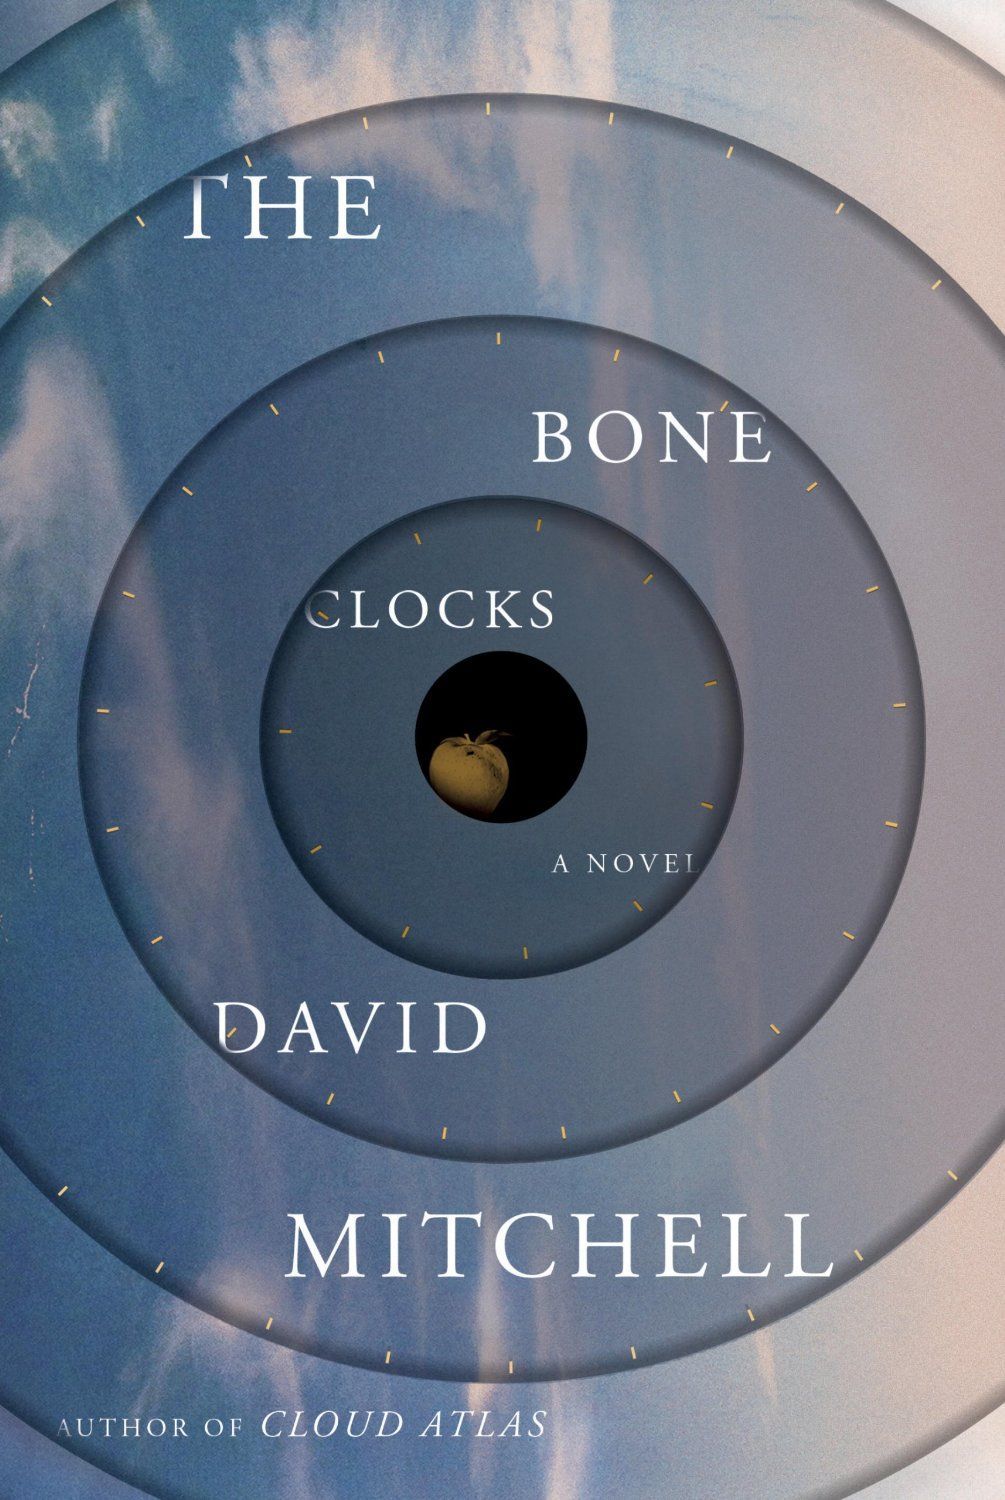 War in Pieces: Violence and Conflict in David Mitchell’s “The Bone Clocks”